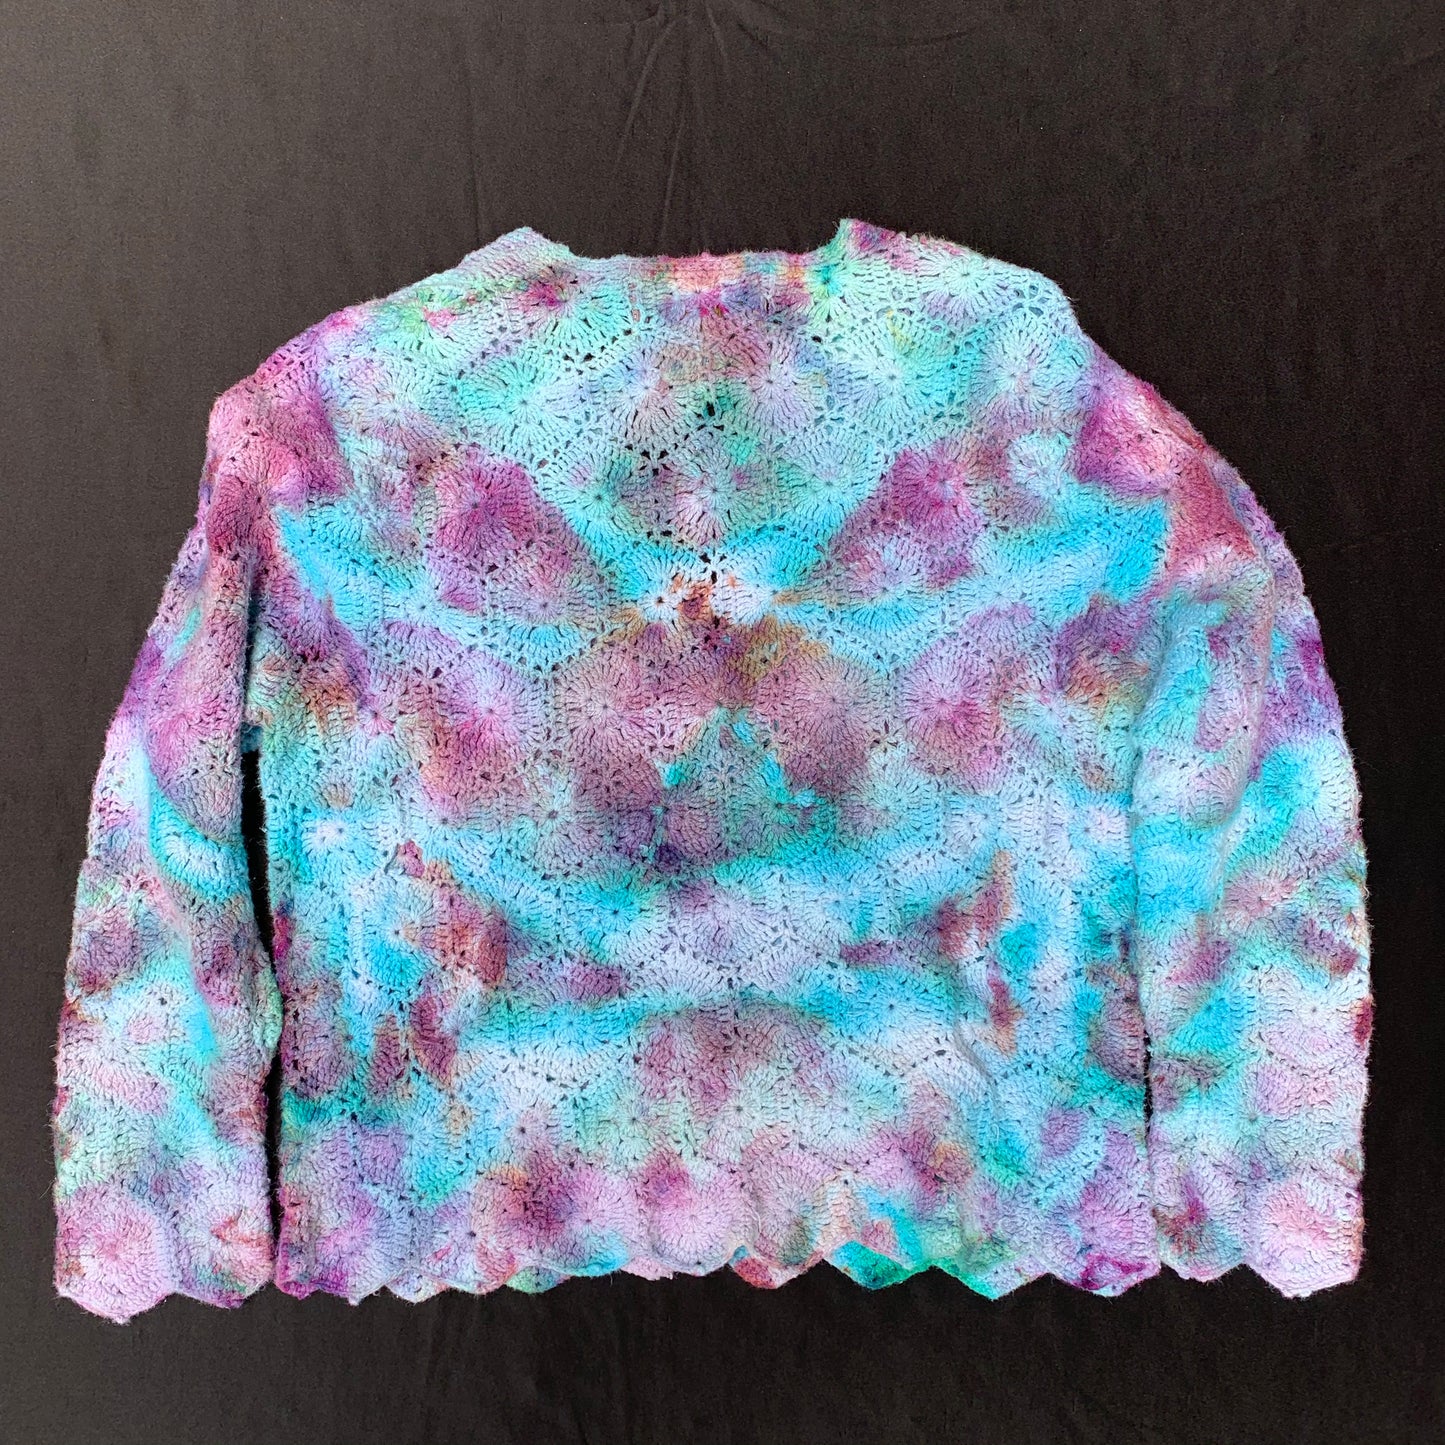 Magical Berry Sky | Sweater/Shirt | 34" chest